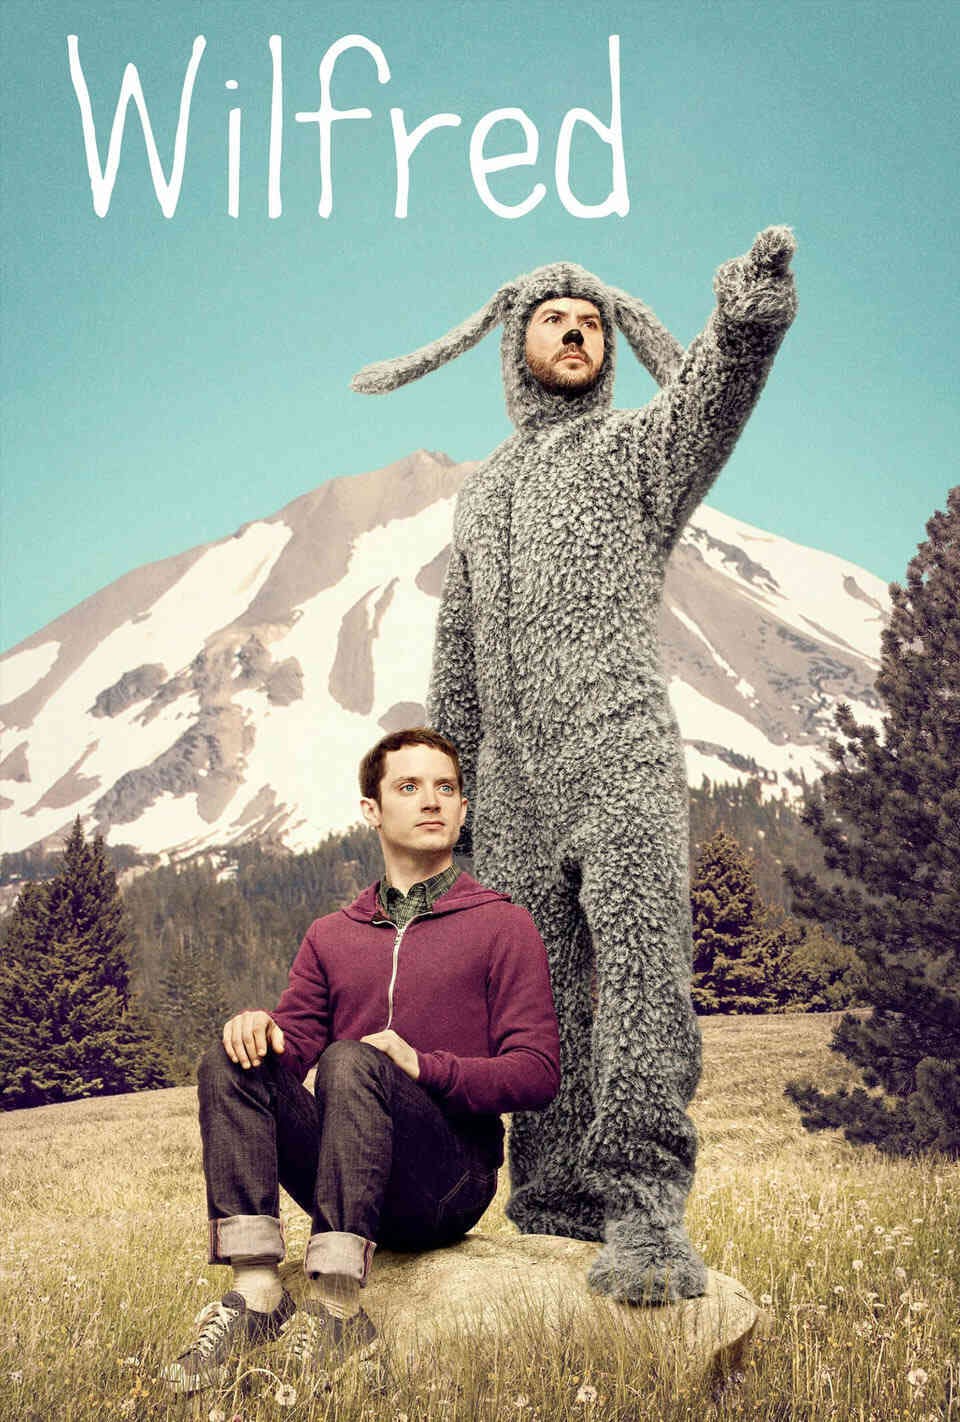 Read Wilfred screenplay (poster)